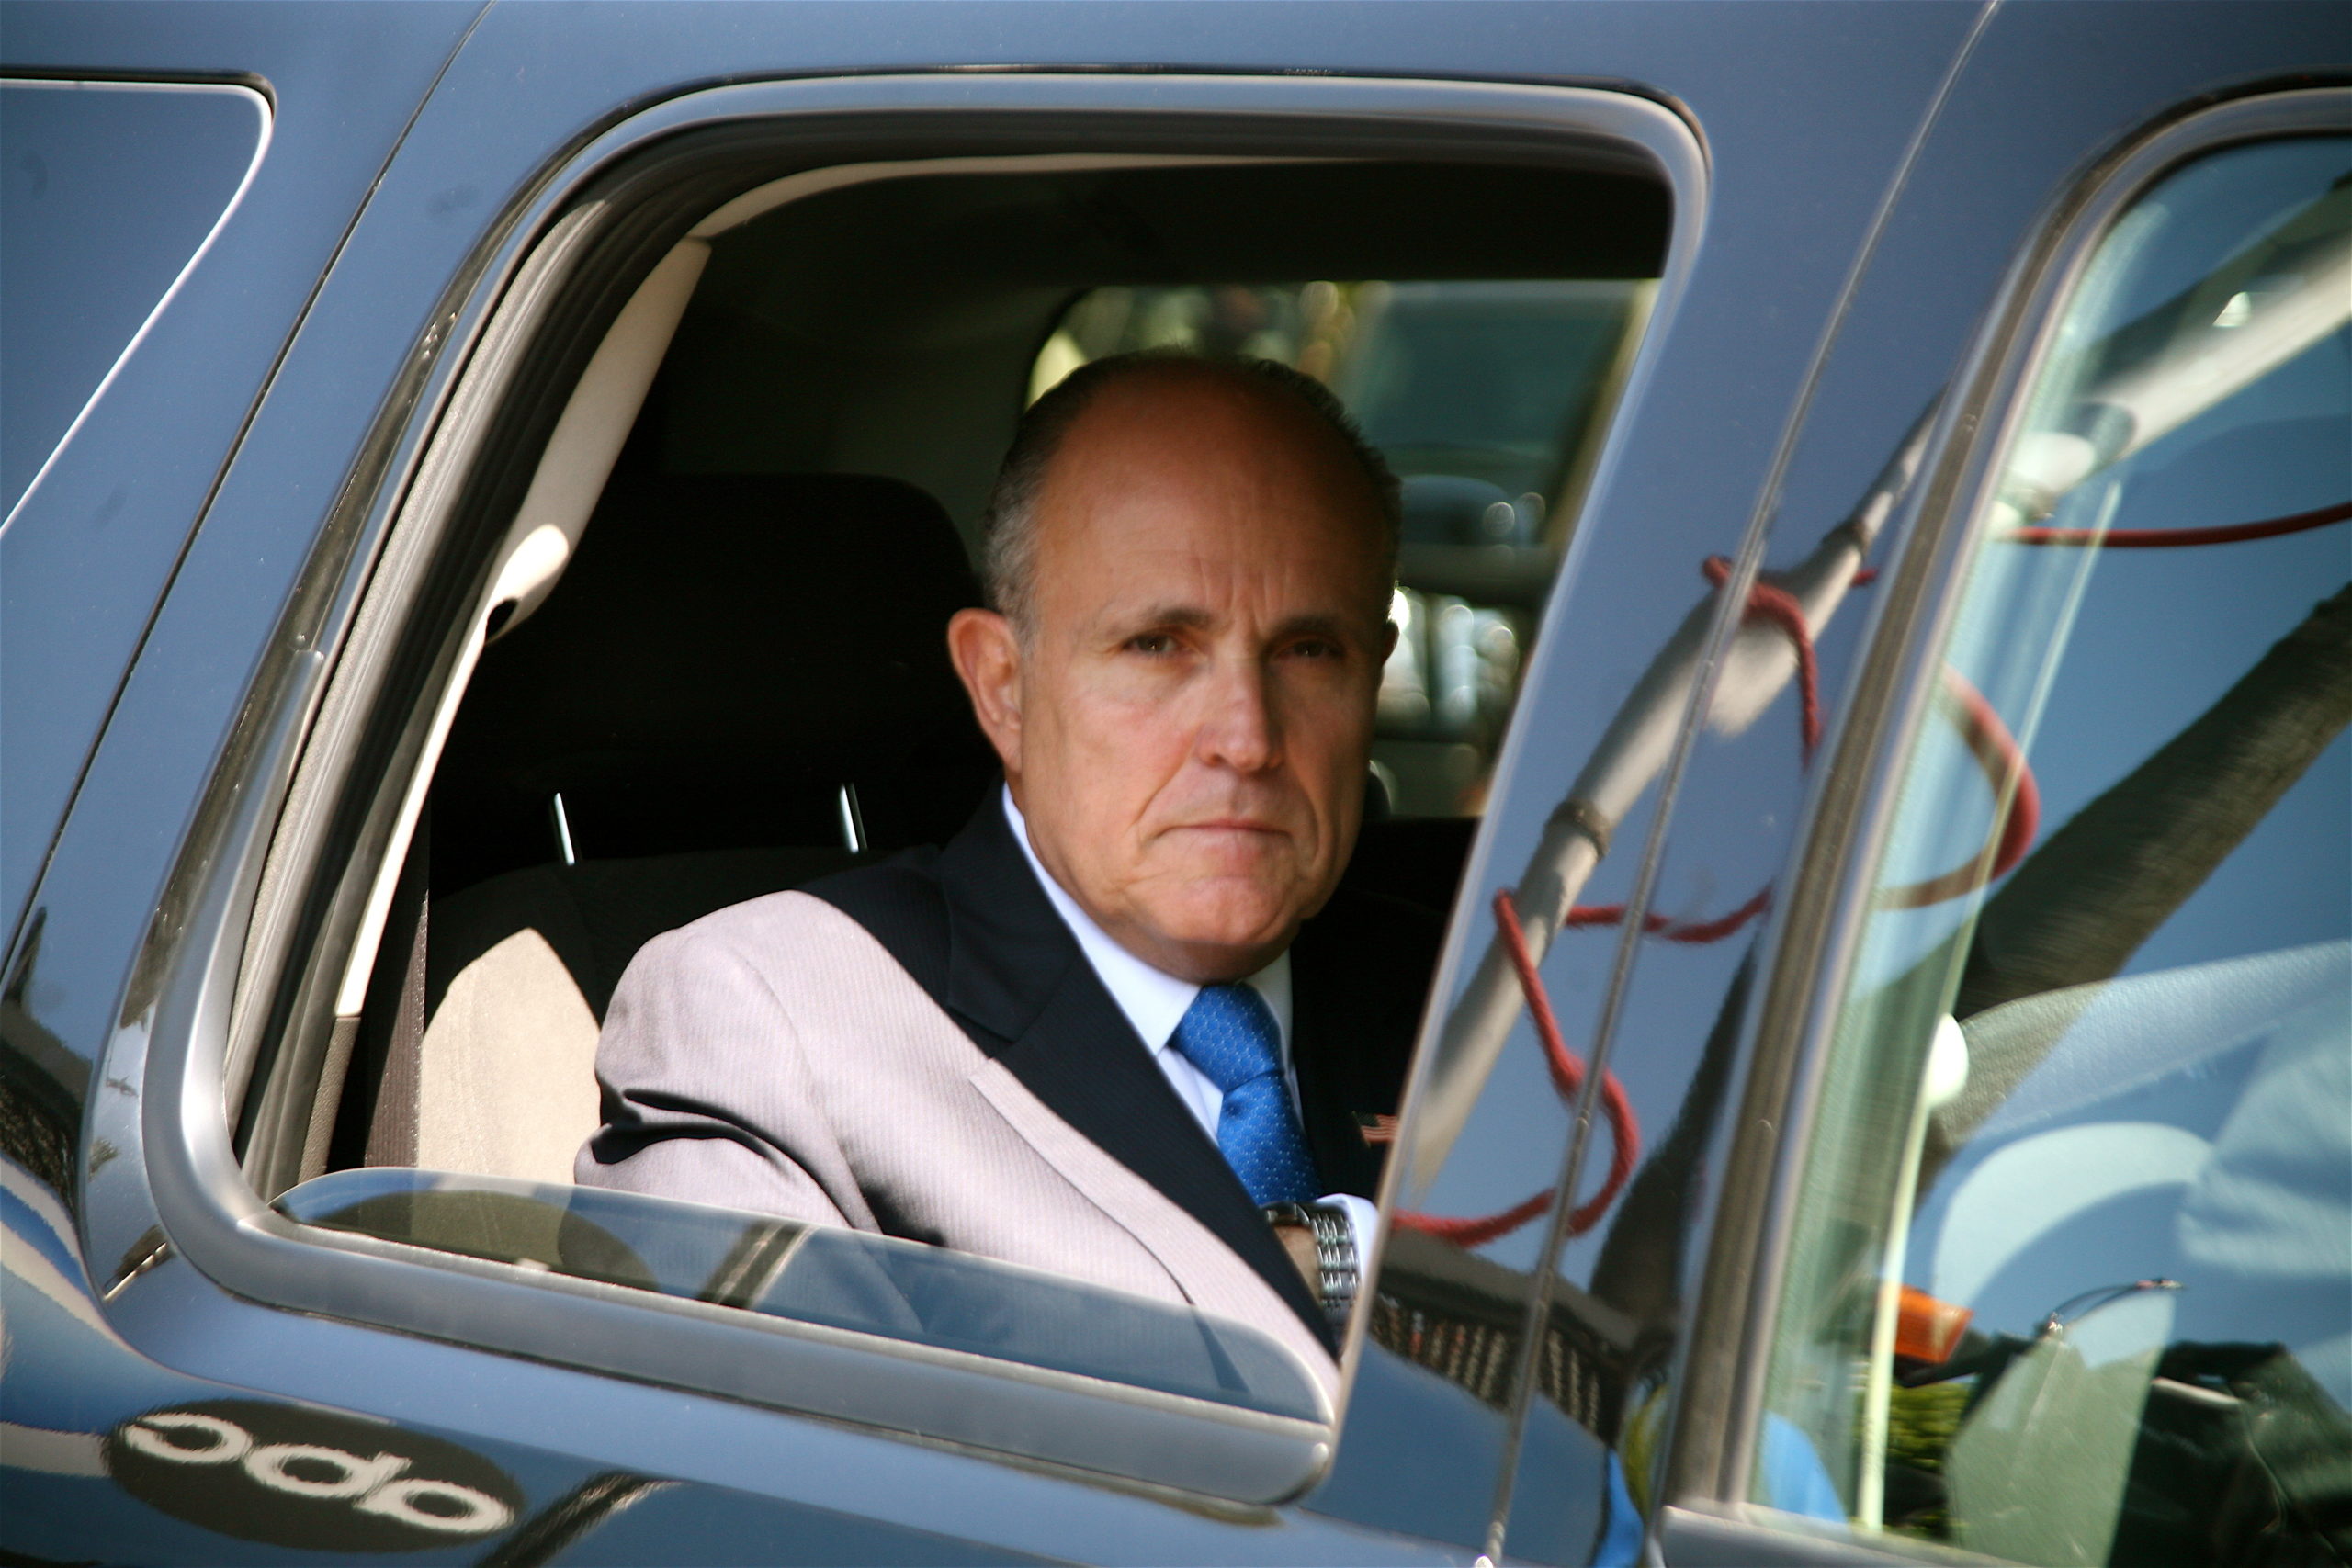 Update: Rudy Giuliani's Law License Suspended for Ethics Violations